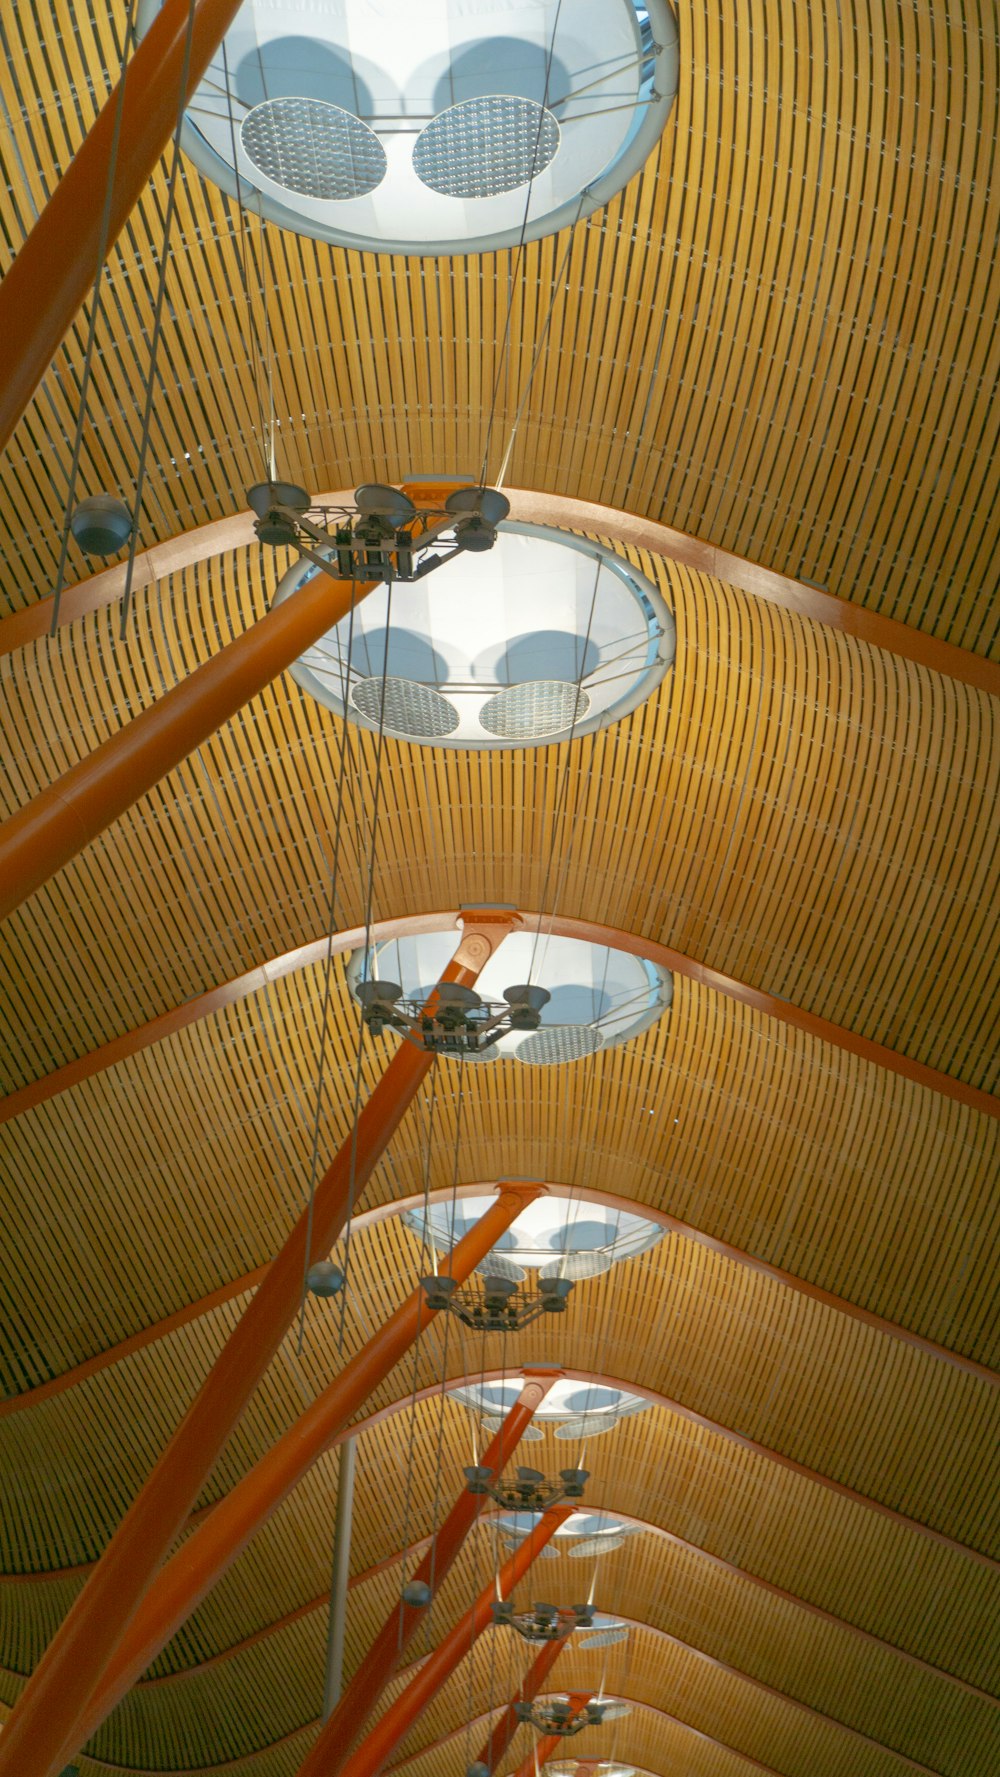 the ceiling of a building with many circular lights